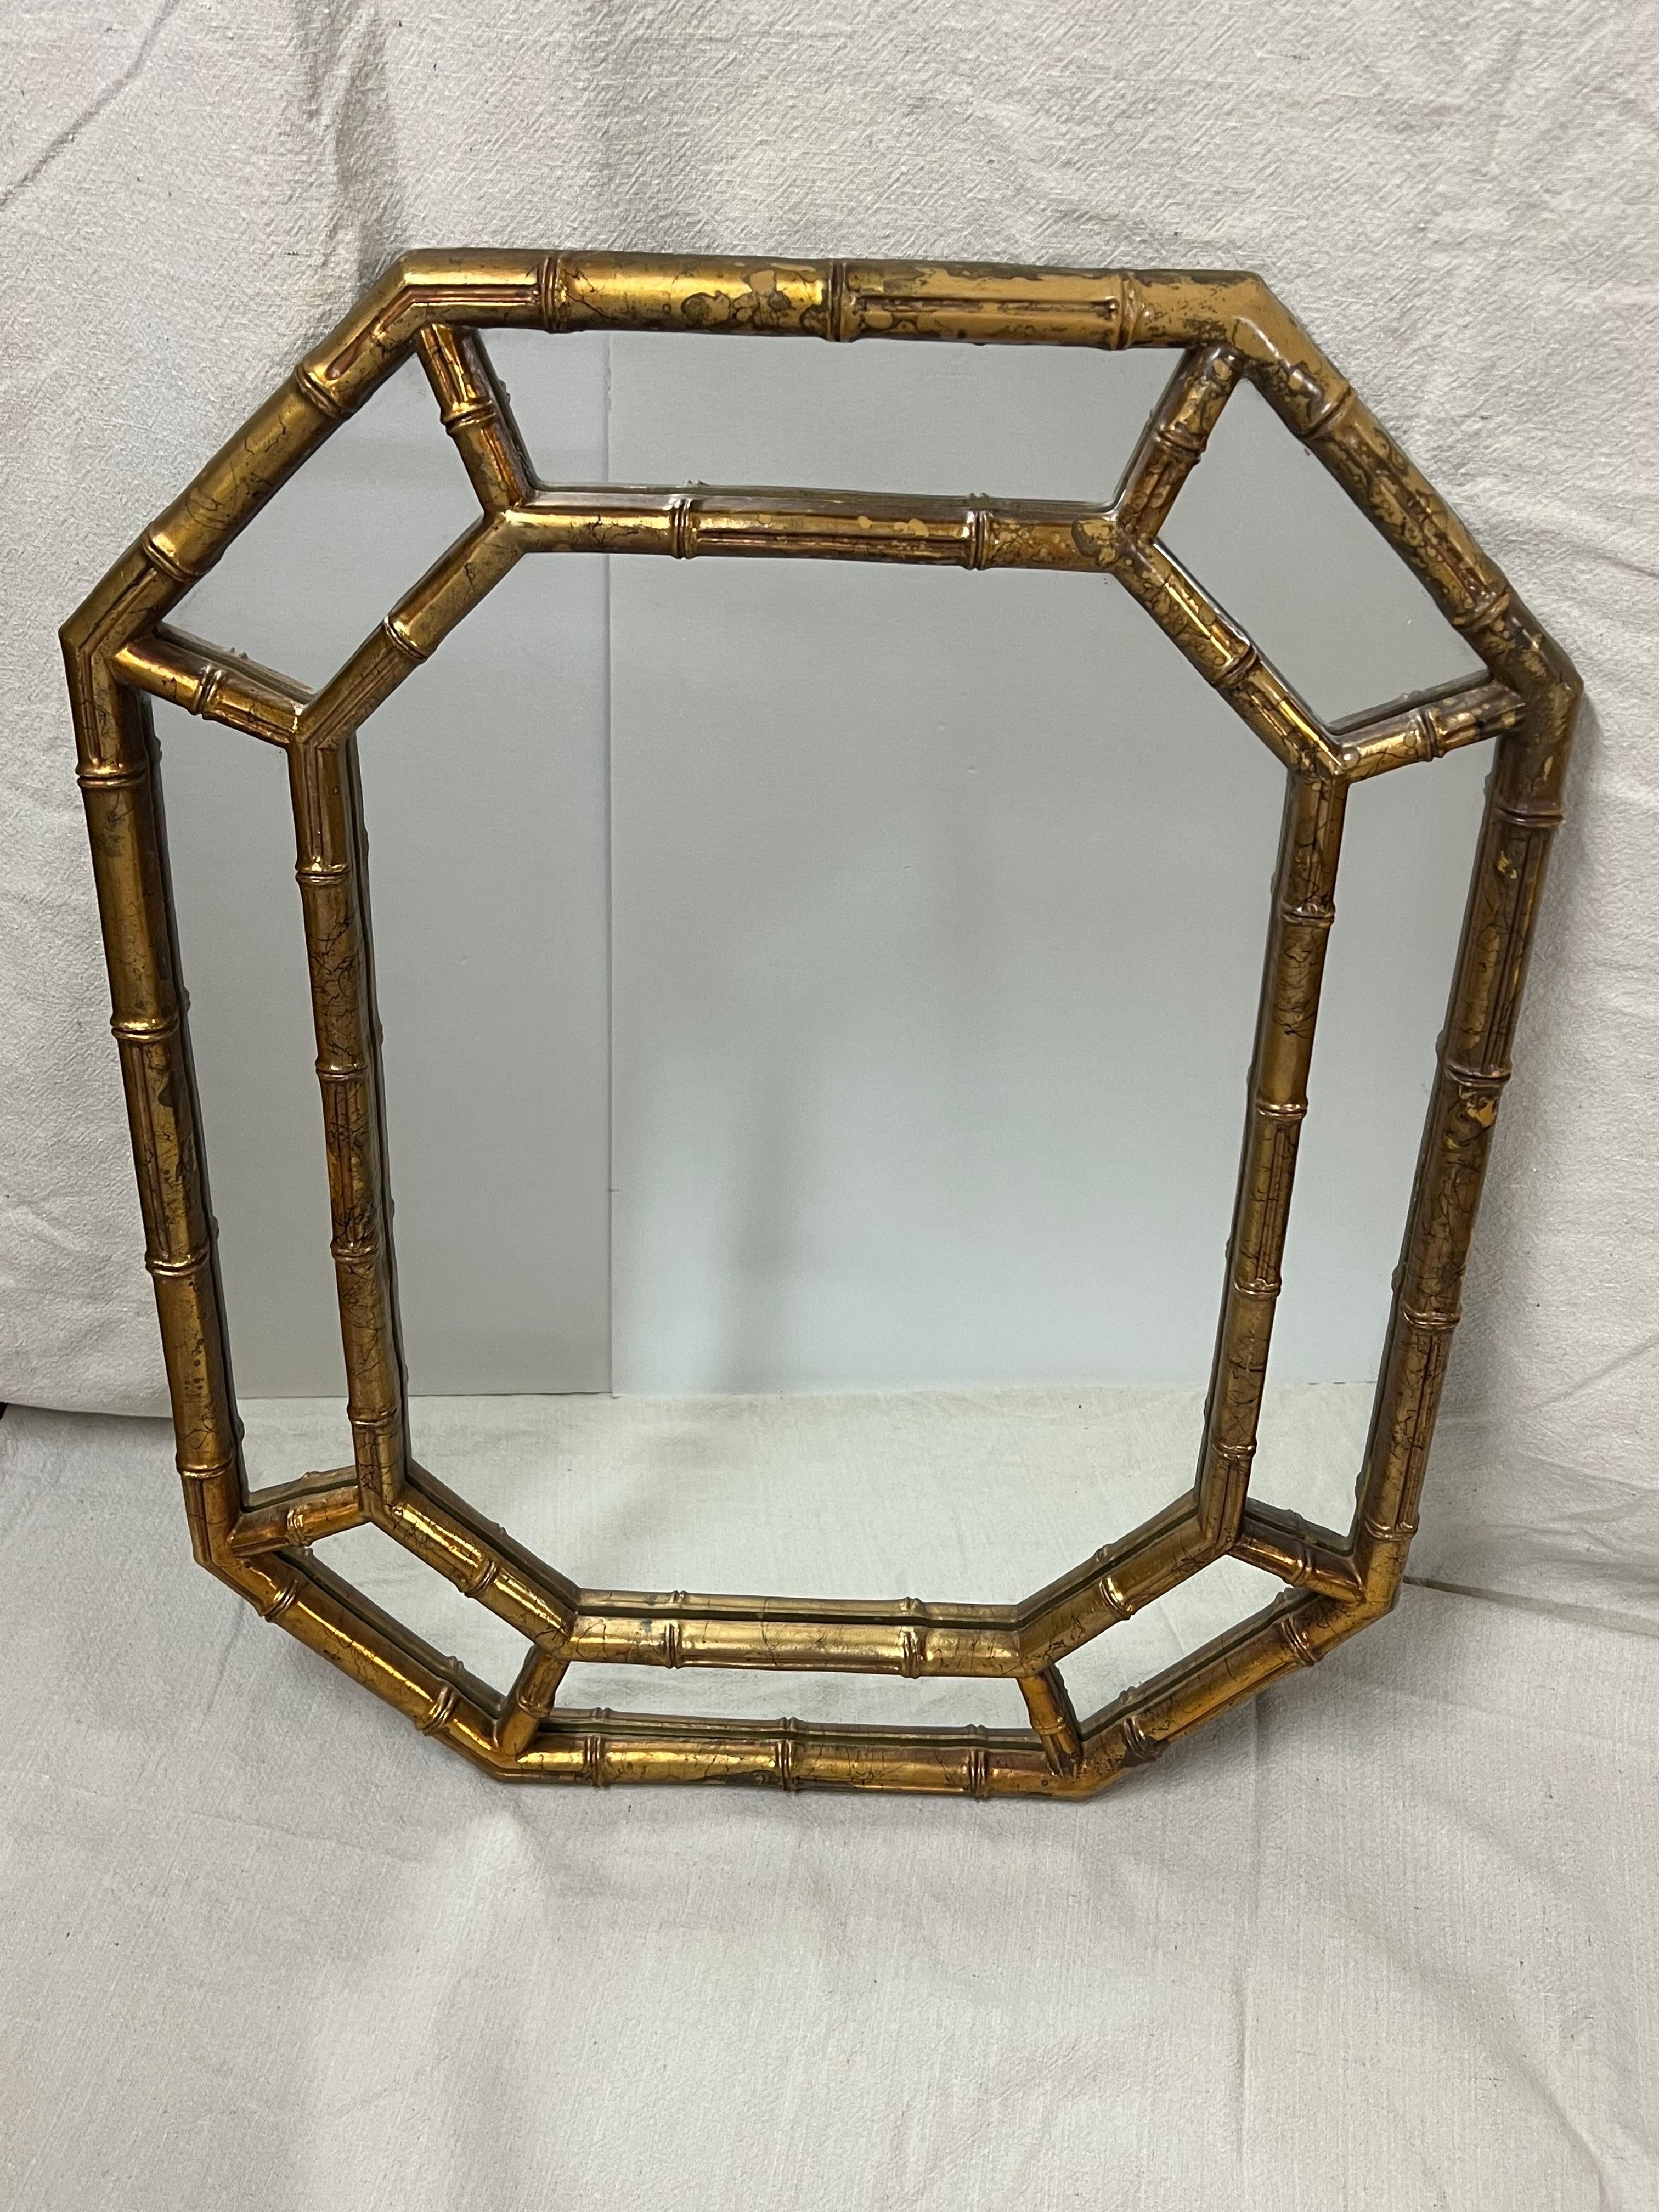 Faux bamboo gilt octagonal mirror, Nice vintage mirror . Perfect for a hallway or a small powder room. Classic style and design. Made of composition